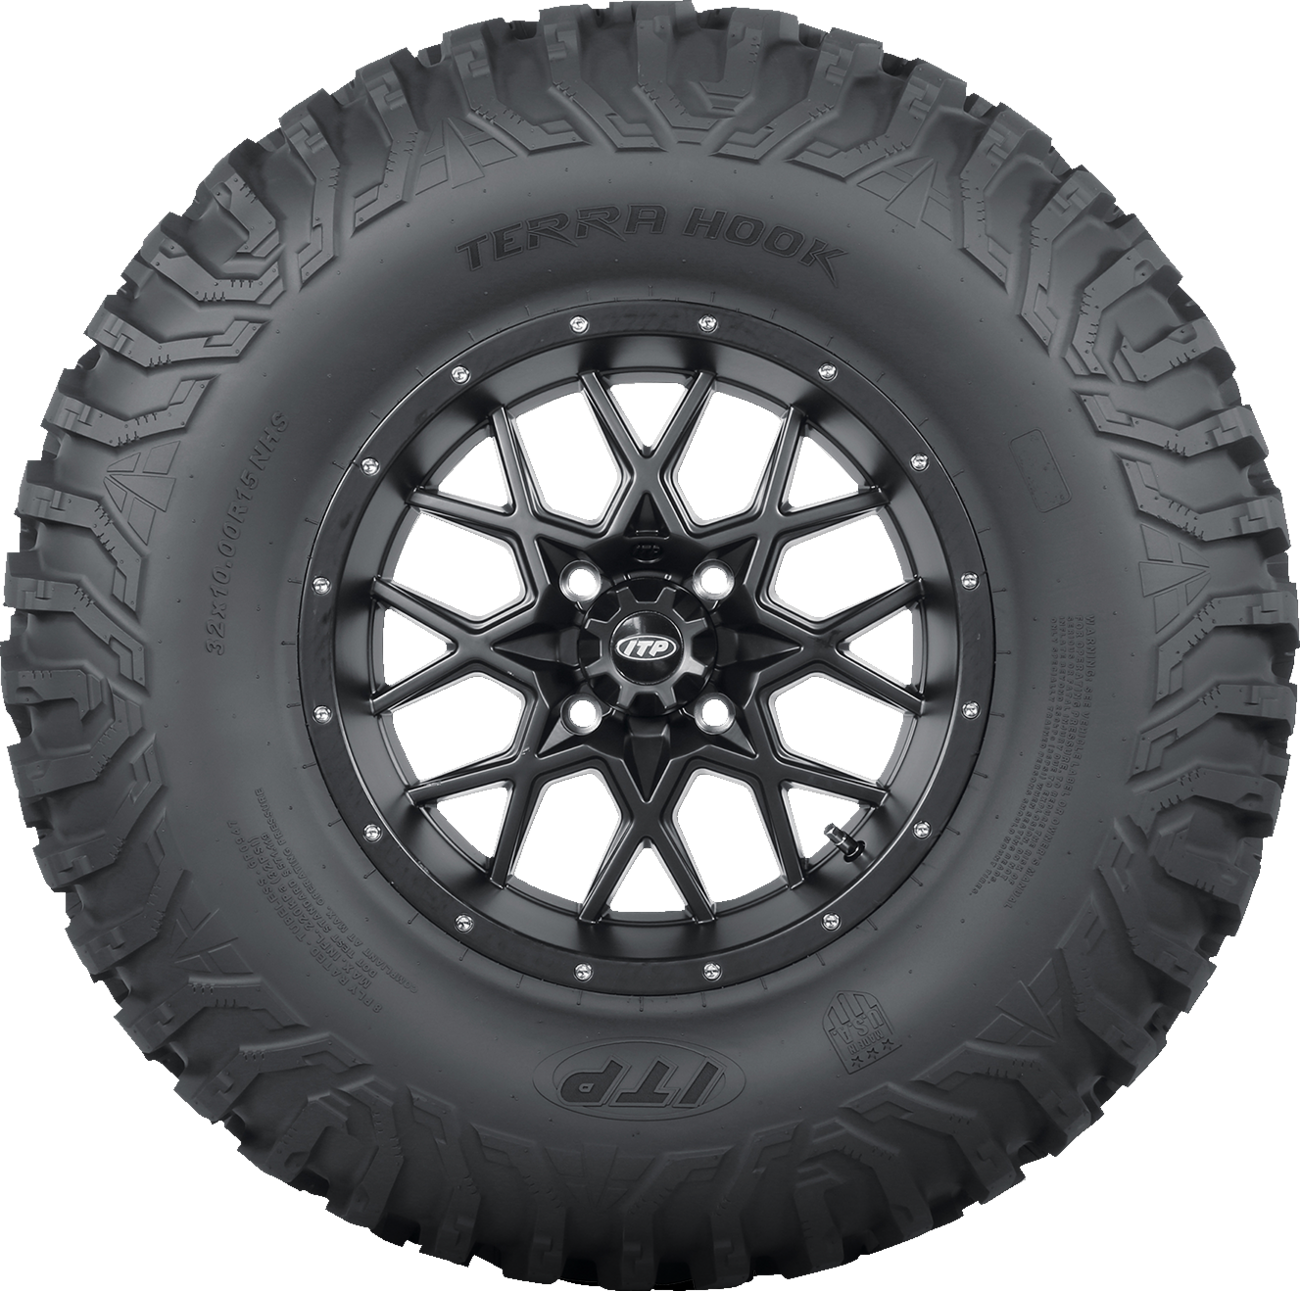 ITP Tire - Terra Hook - Front/Rear - 28x11R14 - 8 Ply 6P0944